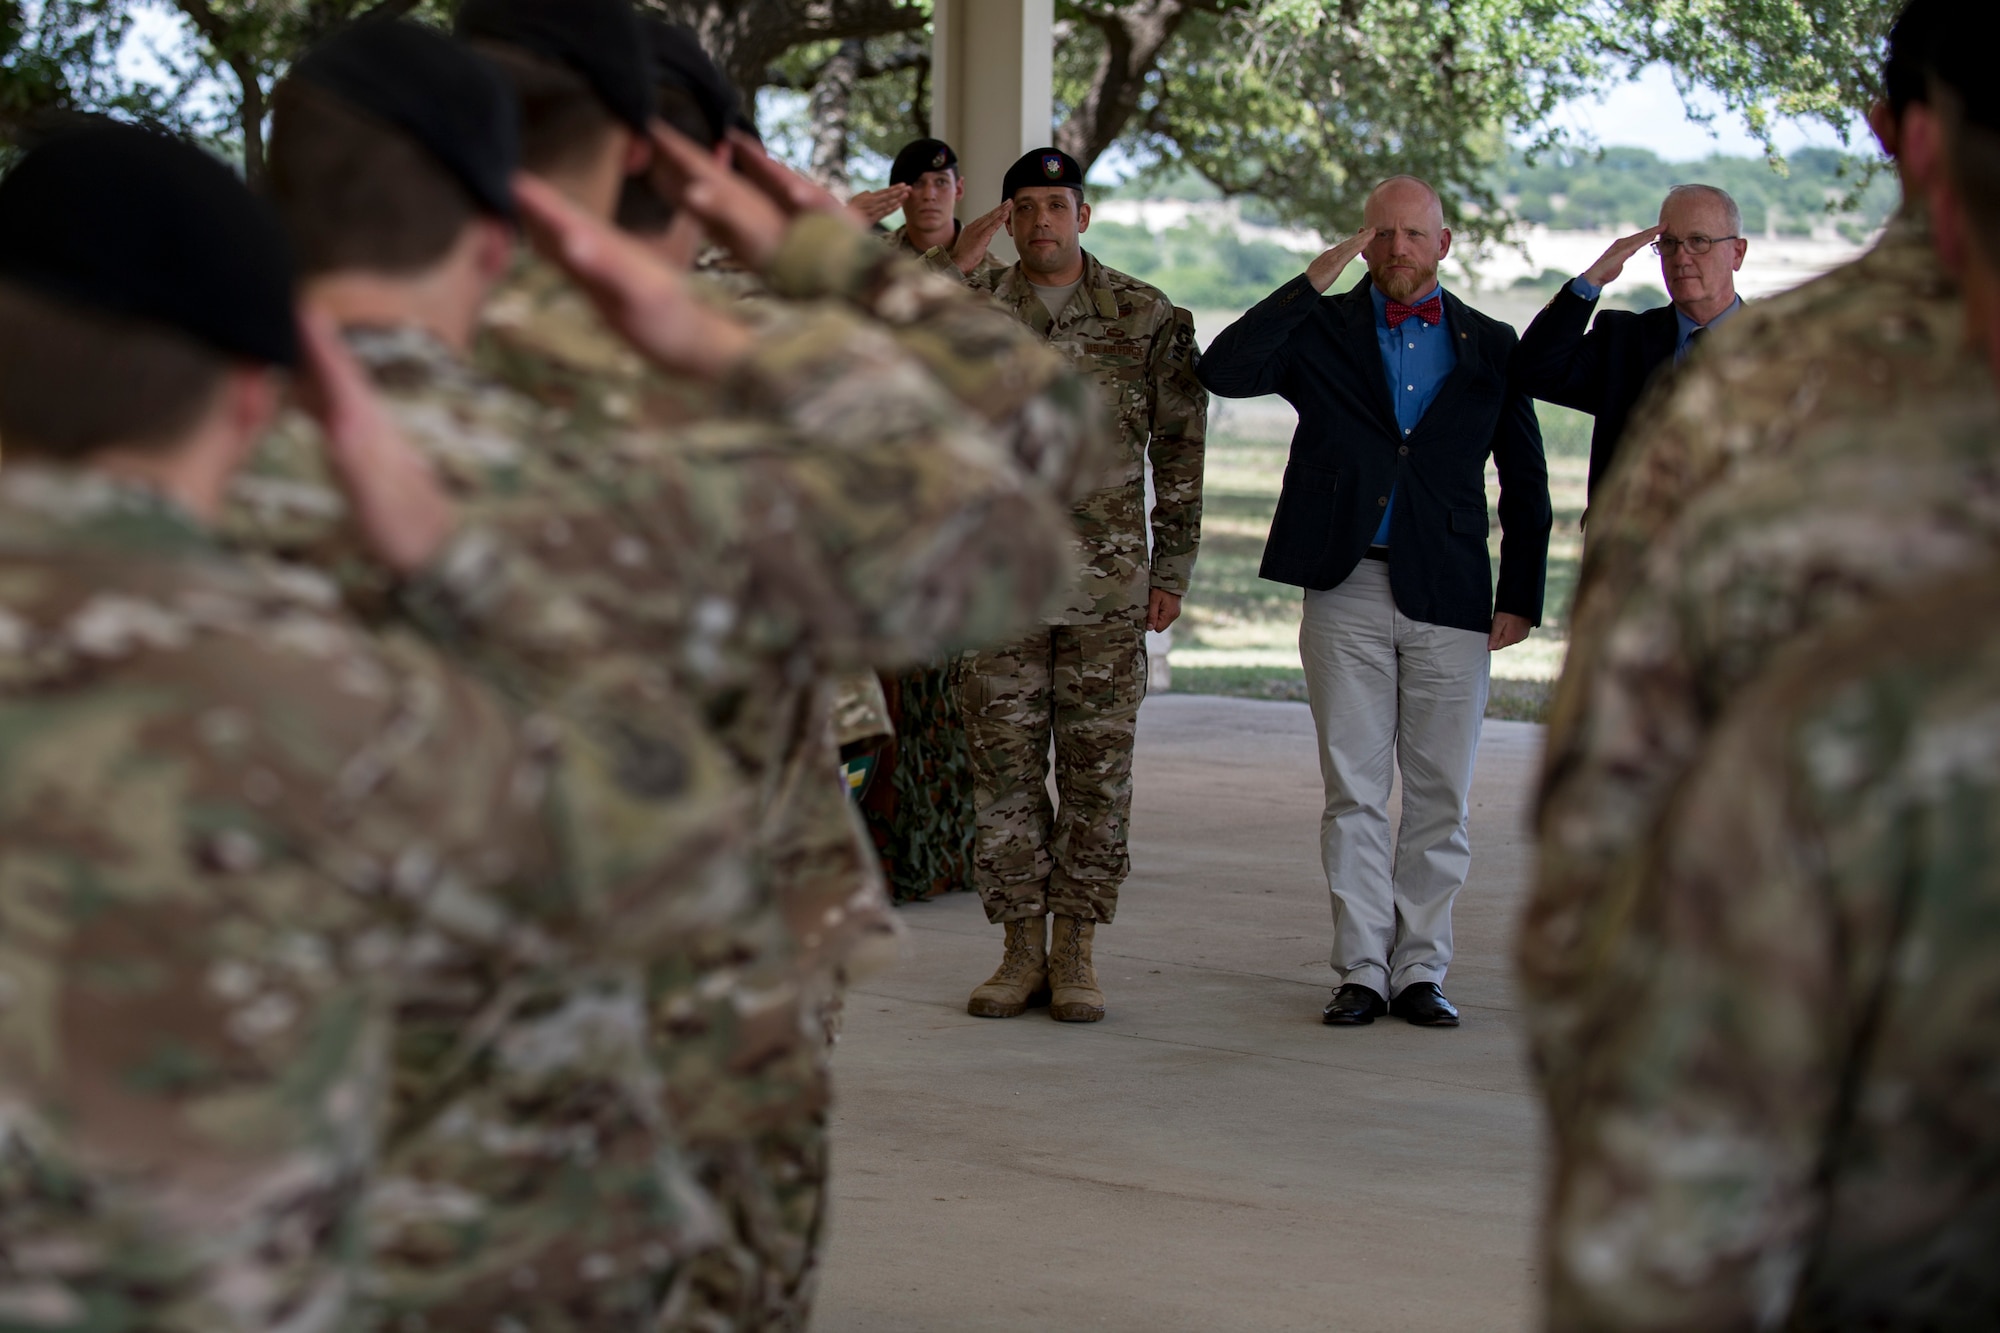 Past and present 11th Air Support Operations Squadron (ASOS) commanders salute a formation of 11th ASOS Airmen during a squadron inactivation ceremony, June 21, 2018, at Fort Hood, Texas. As a part of the 93d Air Ground Operations Wing from Moody Air Force Base, Ga., the 11th ASOS ‘Steel Eagles’ mission will remain unchanged as they continue to support Ft. Hood and absorb into the 9th ASOS. The enhanced 9th ASOS will continue to provide tactical air support to align with any U.S. Army unit that needs air support for their scheme of maneuver. (U.S. Air Force photo by Senior Airman Daniel Snider)